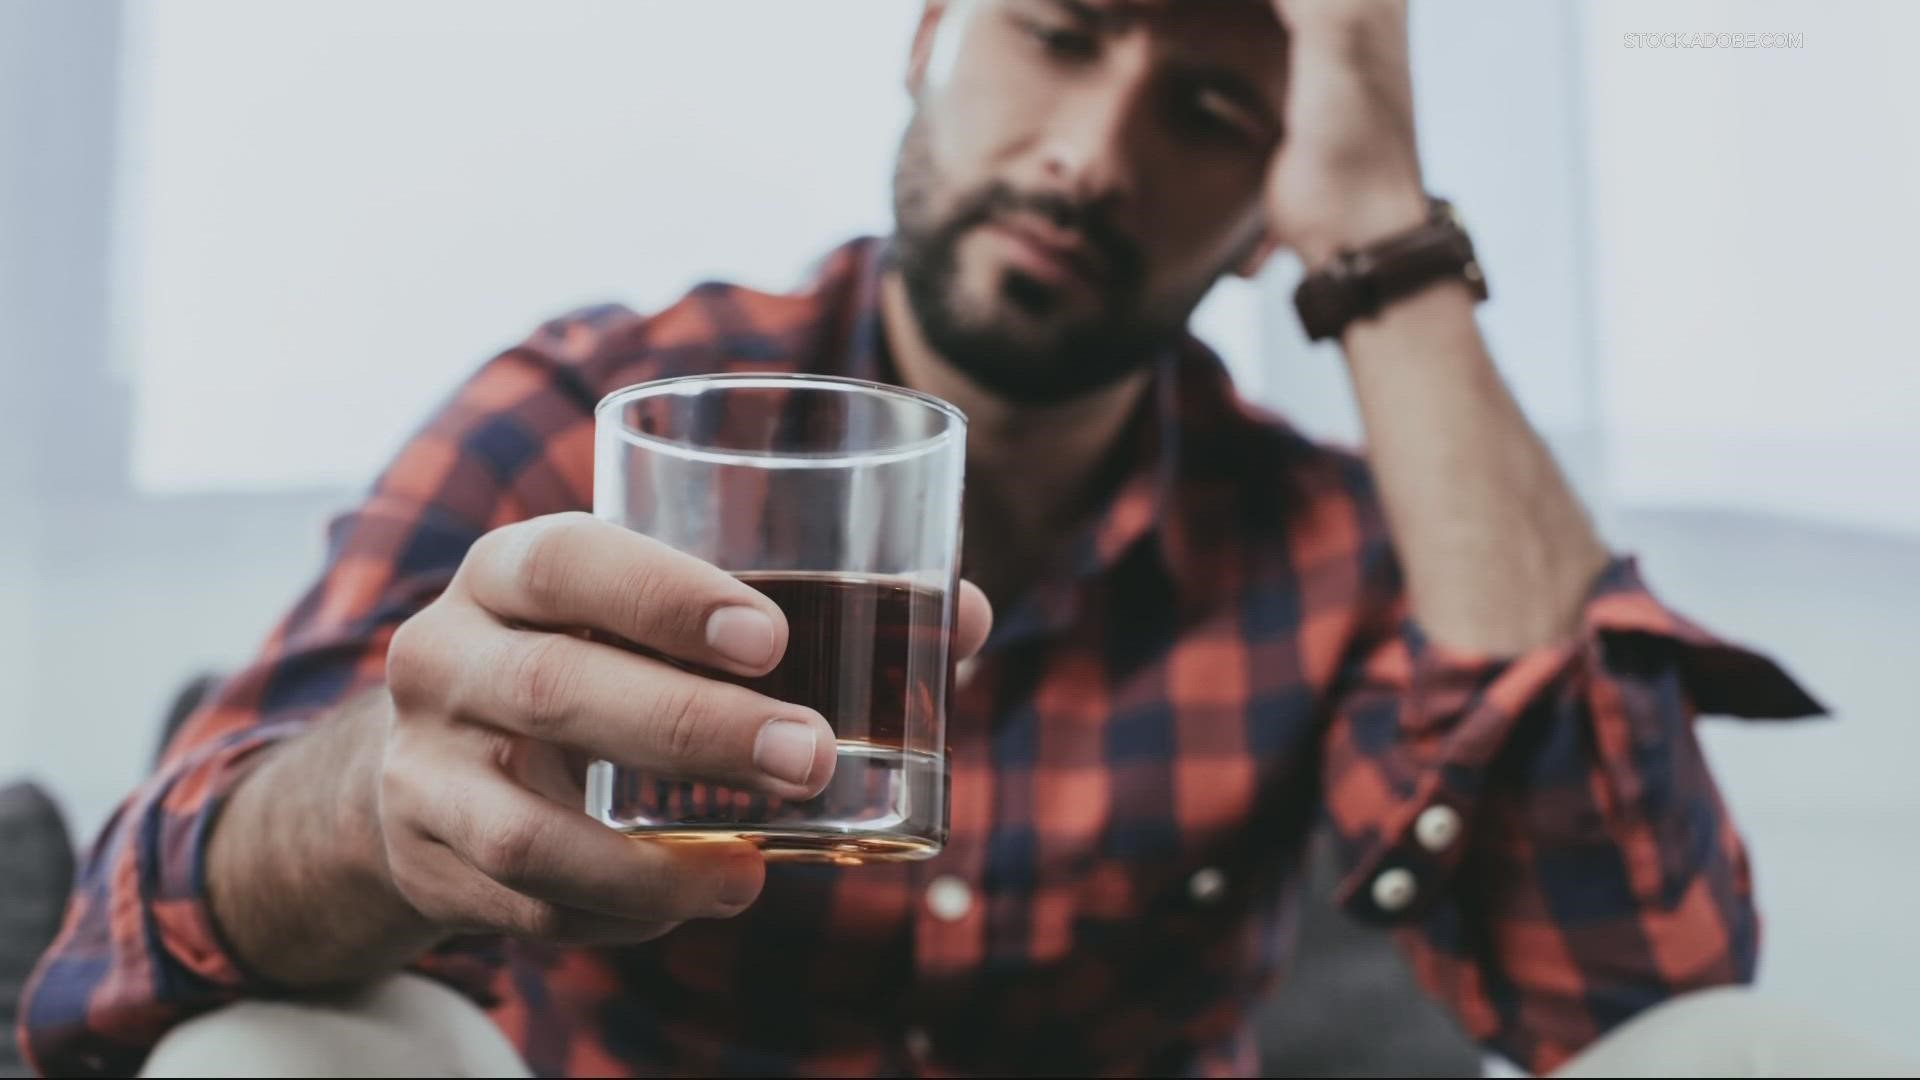 Excessive alcohol drinking is the third leading cause of preventable deaths in Oregon. The Oregon healthy authority has launched "Rethink the Drink" campaign.